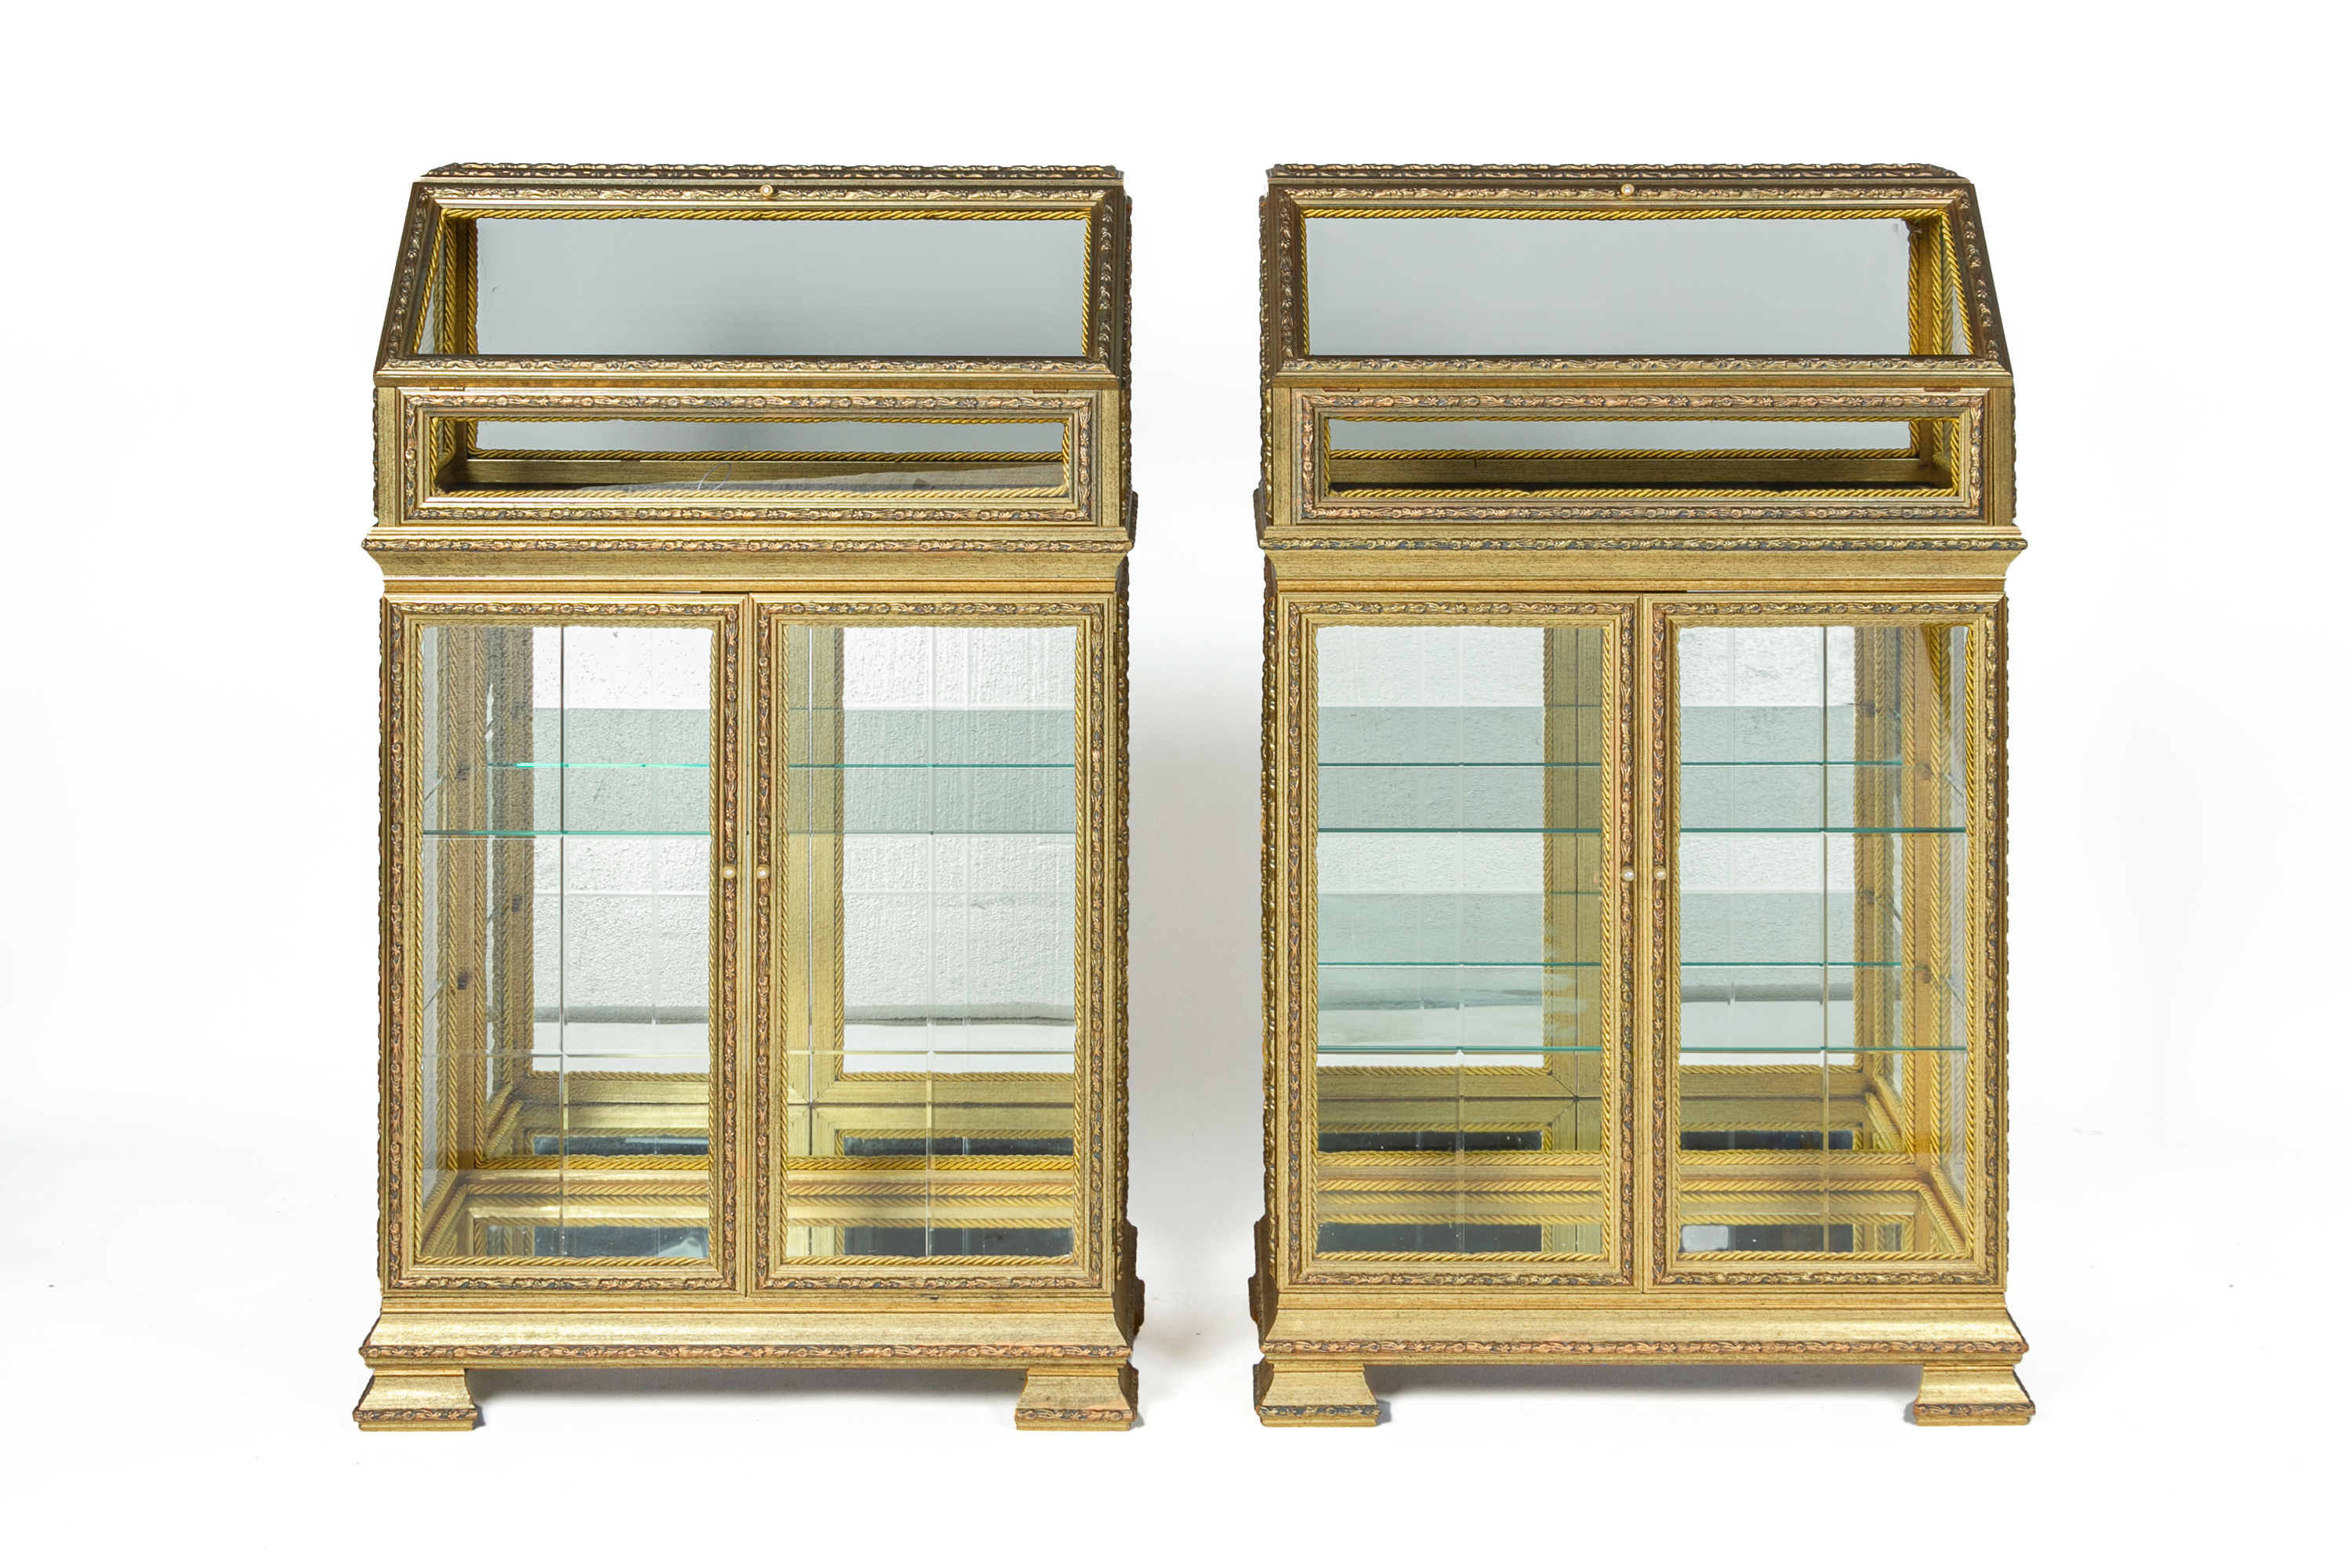 A PAIR OF ITALIAN GLAZED DISPLAY CABINETS BY DA VINCI - Image 2 of 4